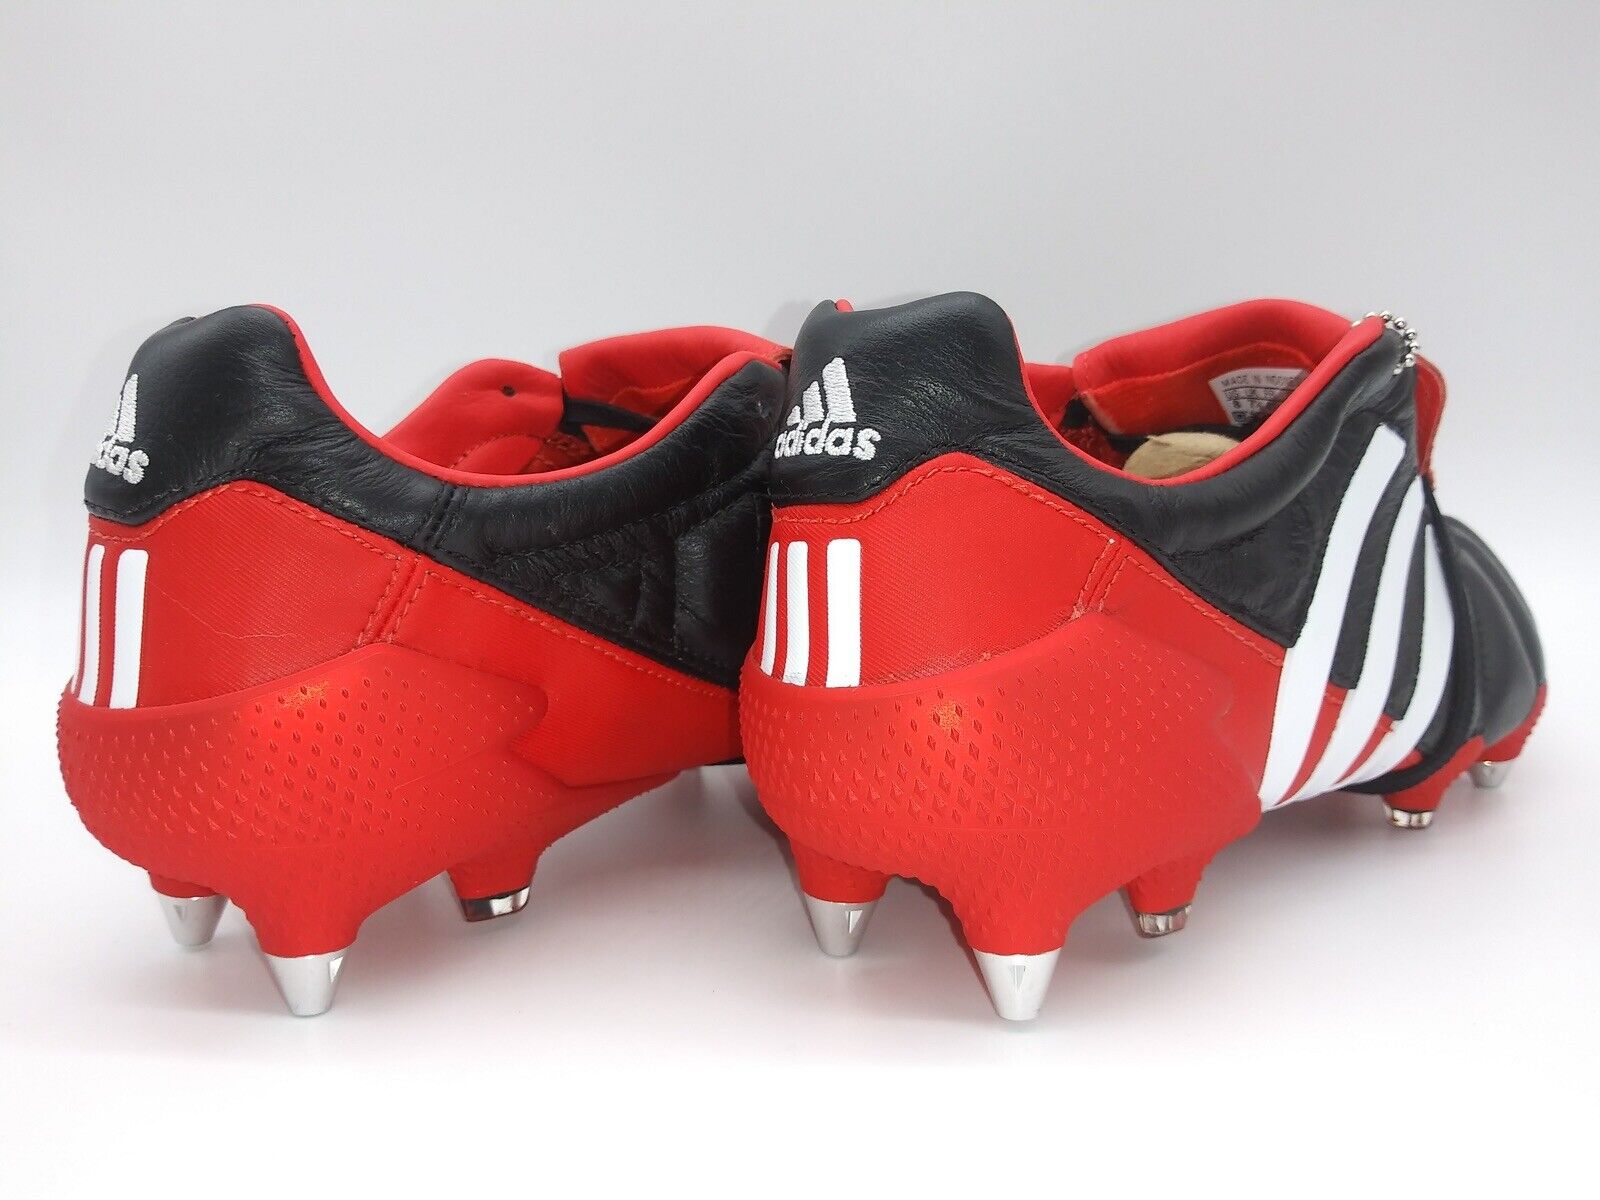 Adidas Predator Mania SG Black Red Limited Edition (Only 2002 Pairs  Worldwide)